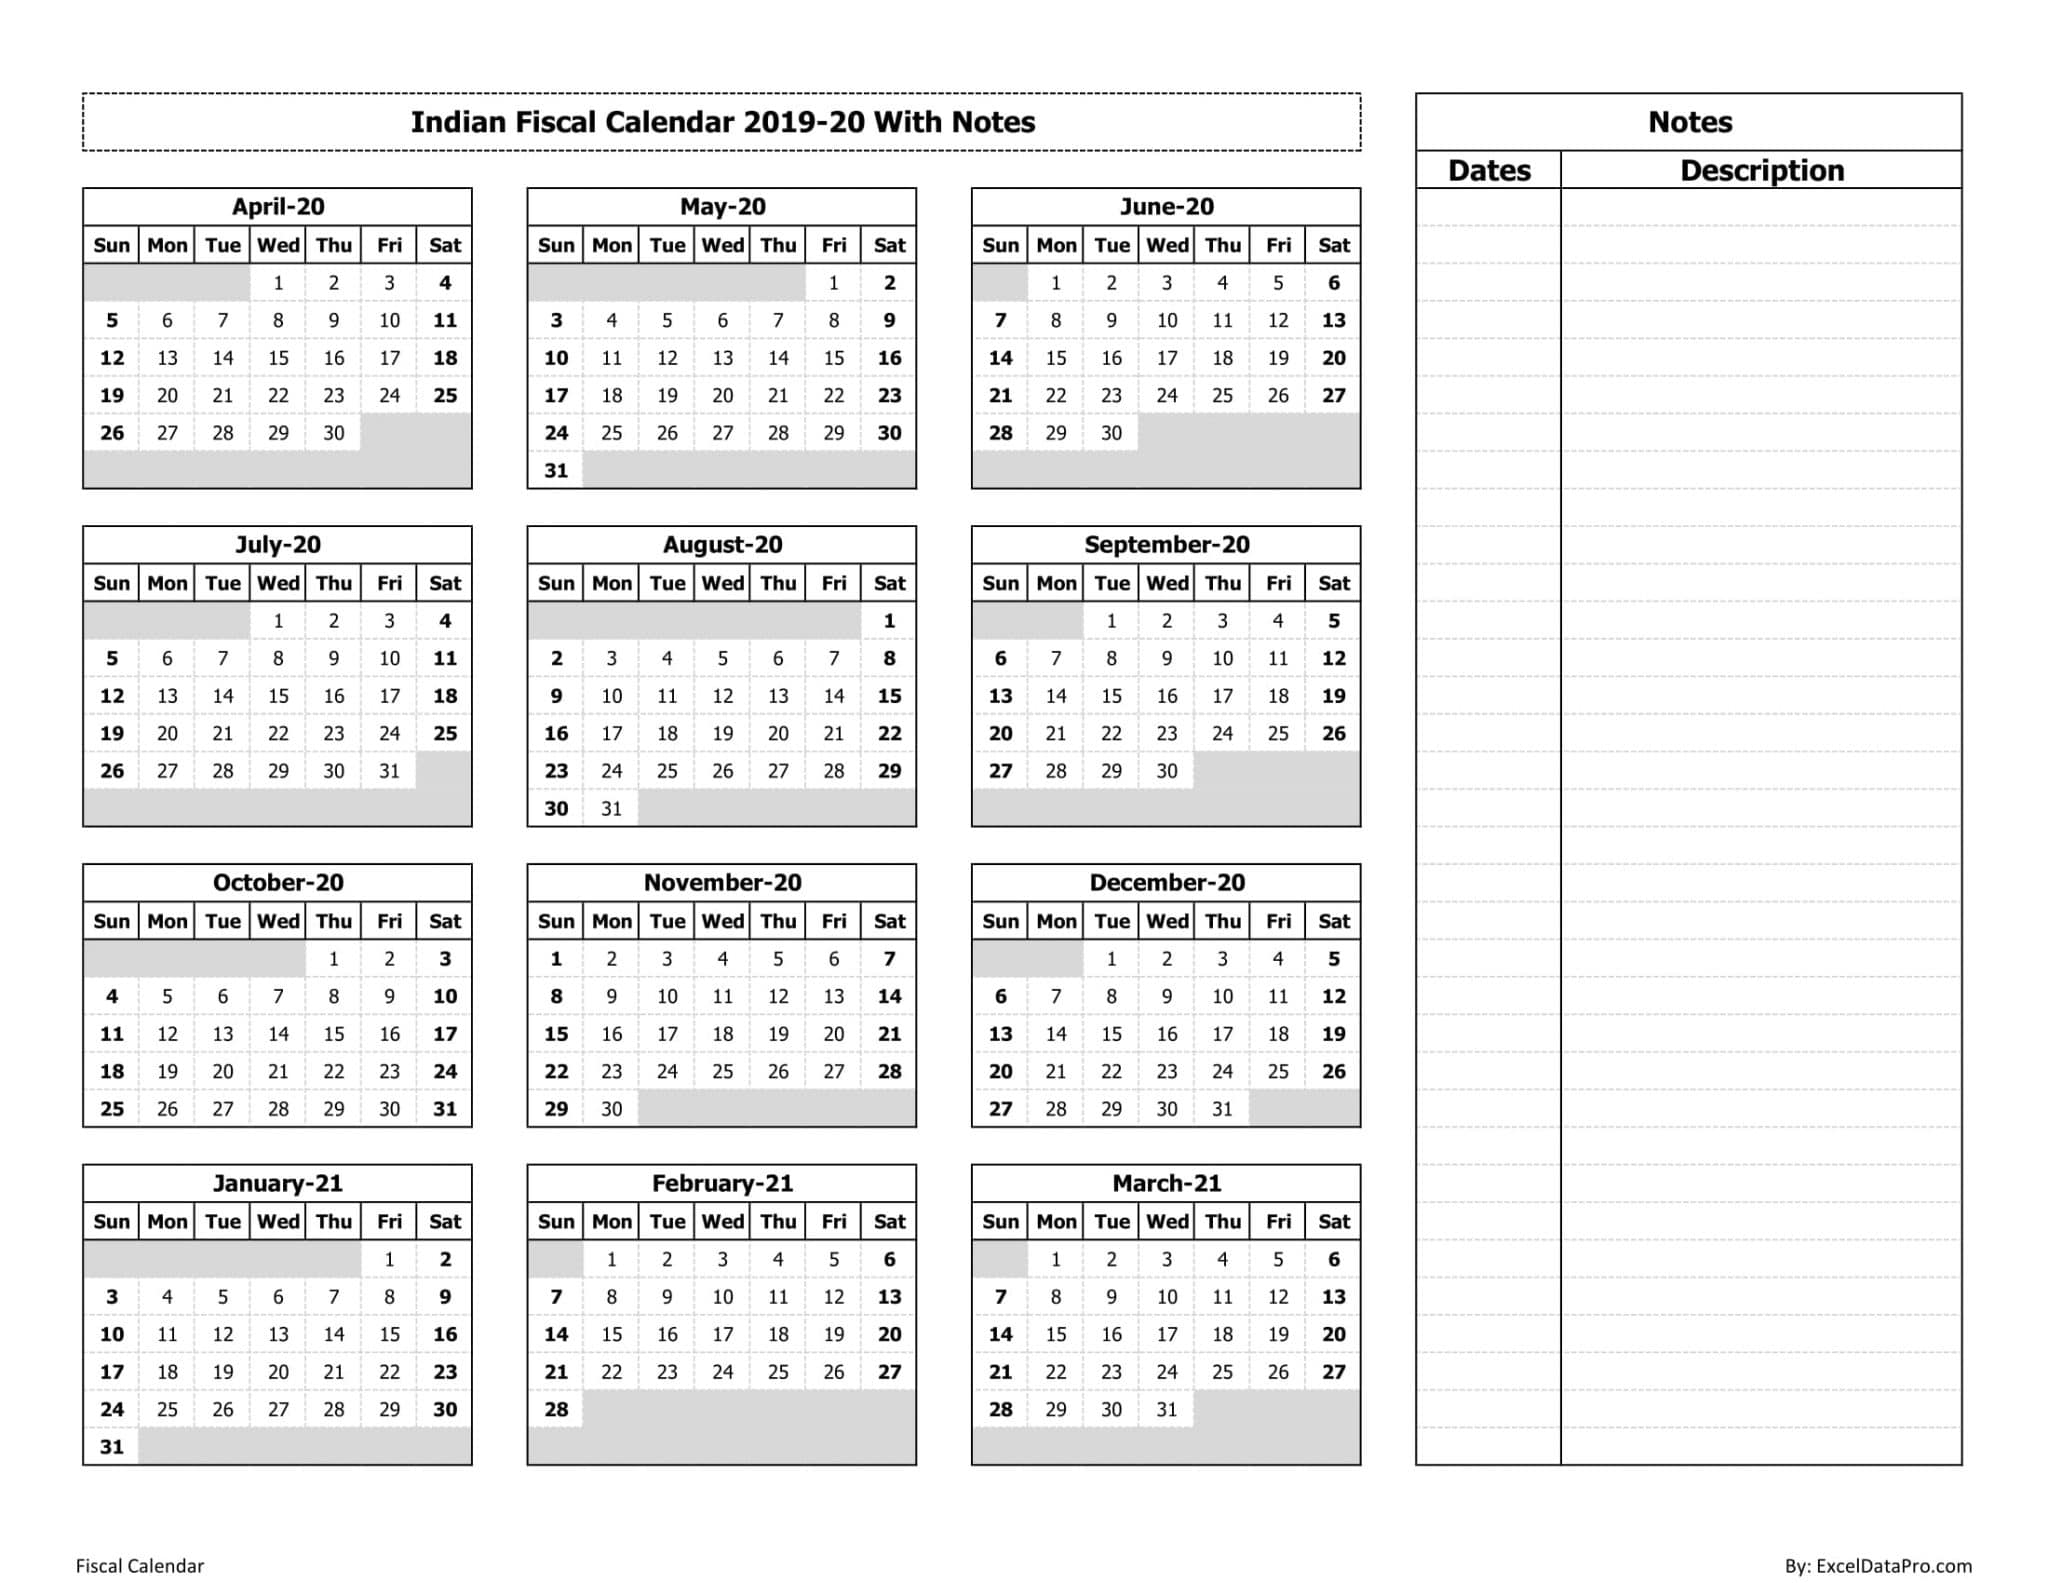 Indian Fiscal Calendar 2020-21 With Notes